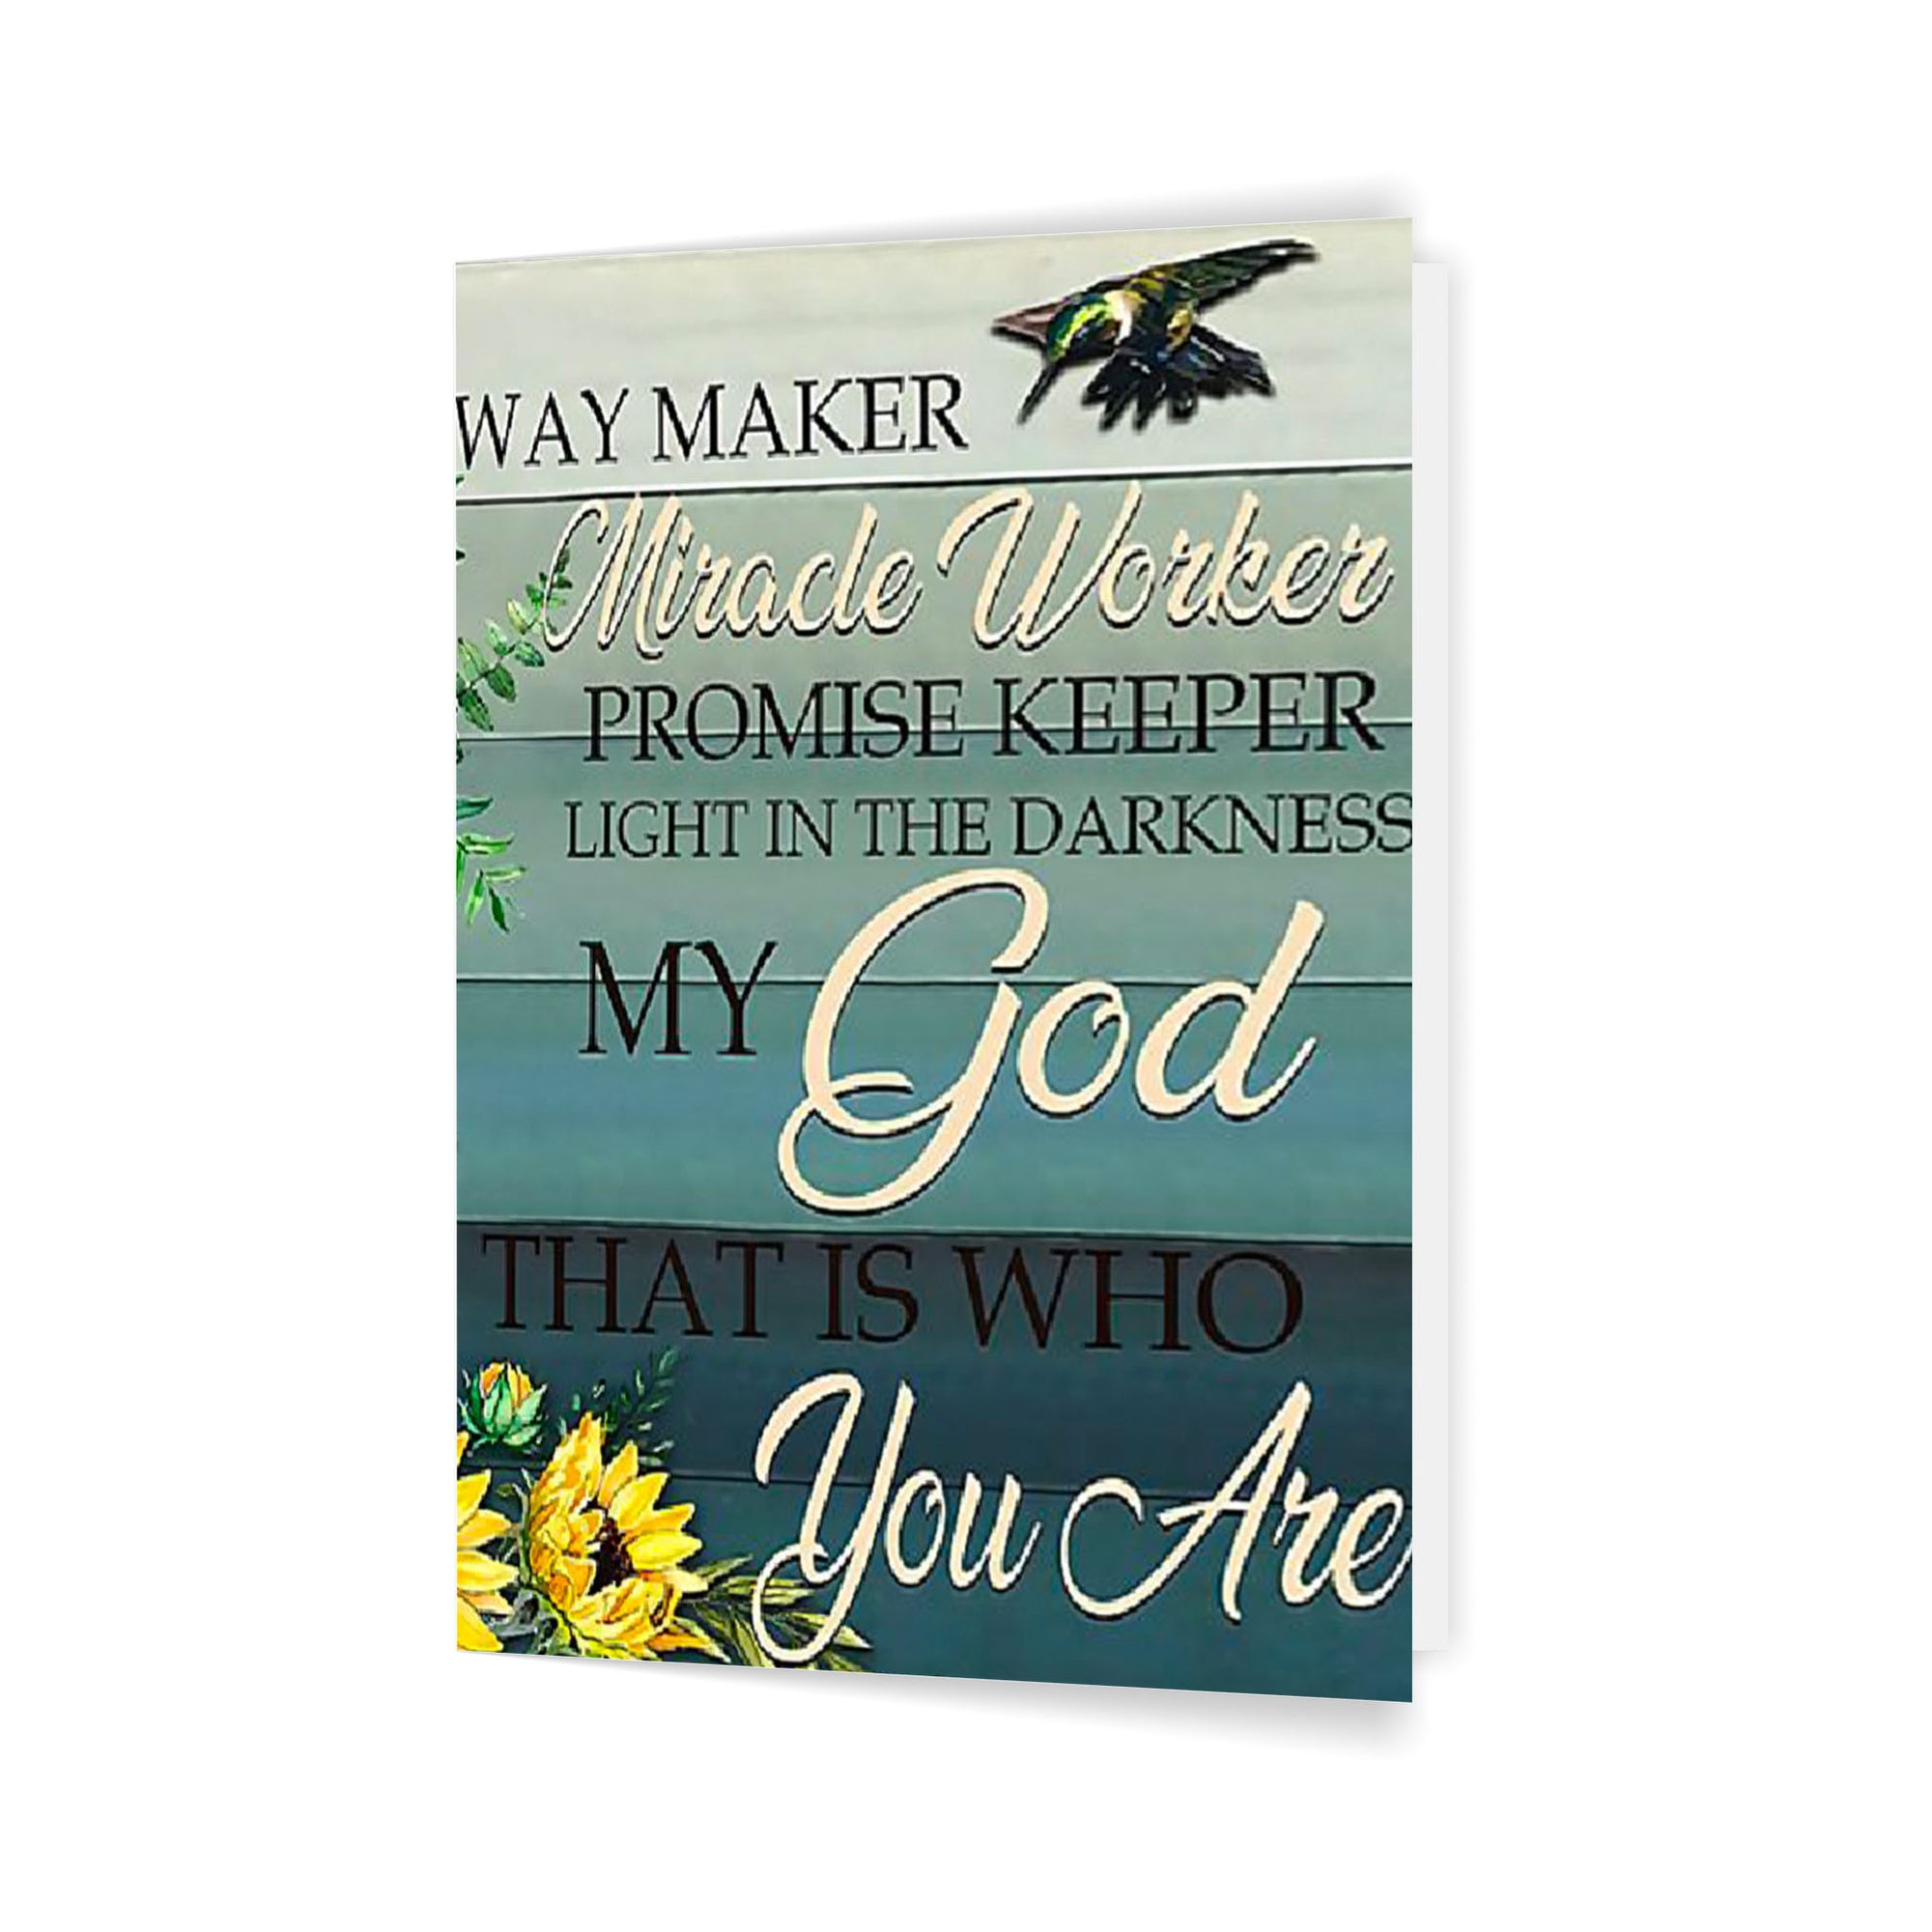 Way Maker Miracle Worker Promise Keeper Light In The Darkness My God Flowers Birds 5x7 Folded Card